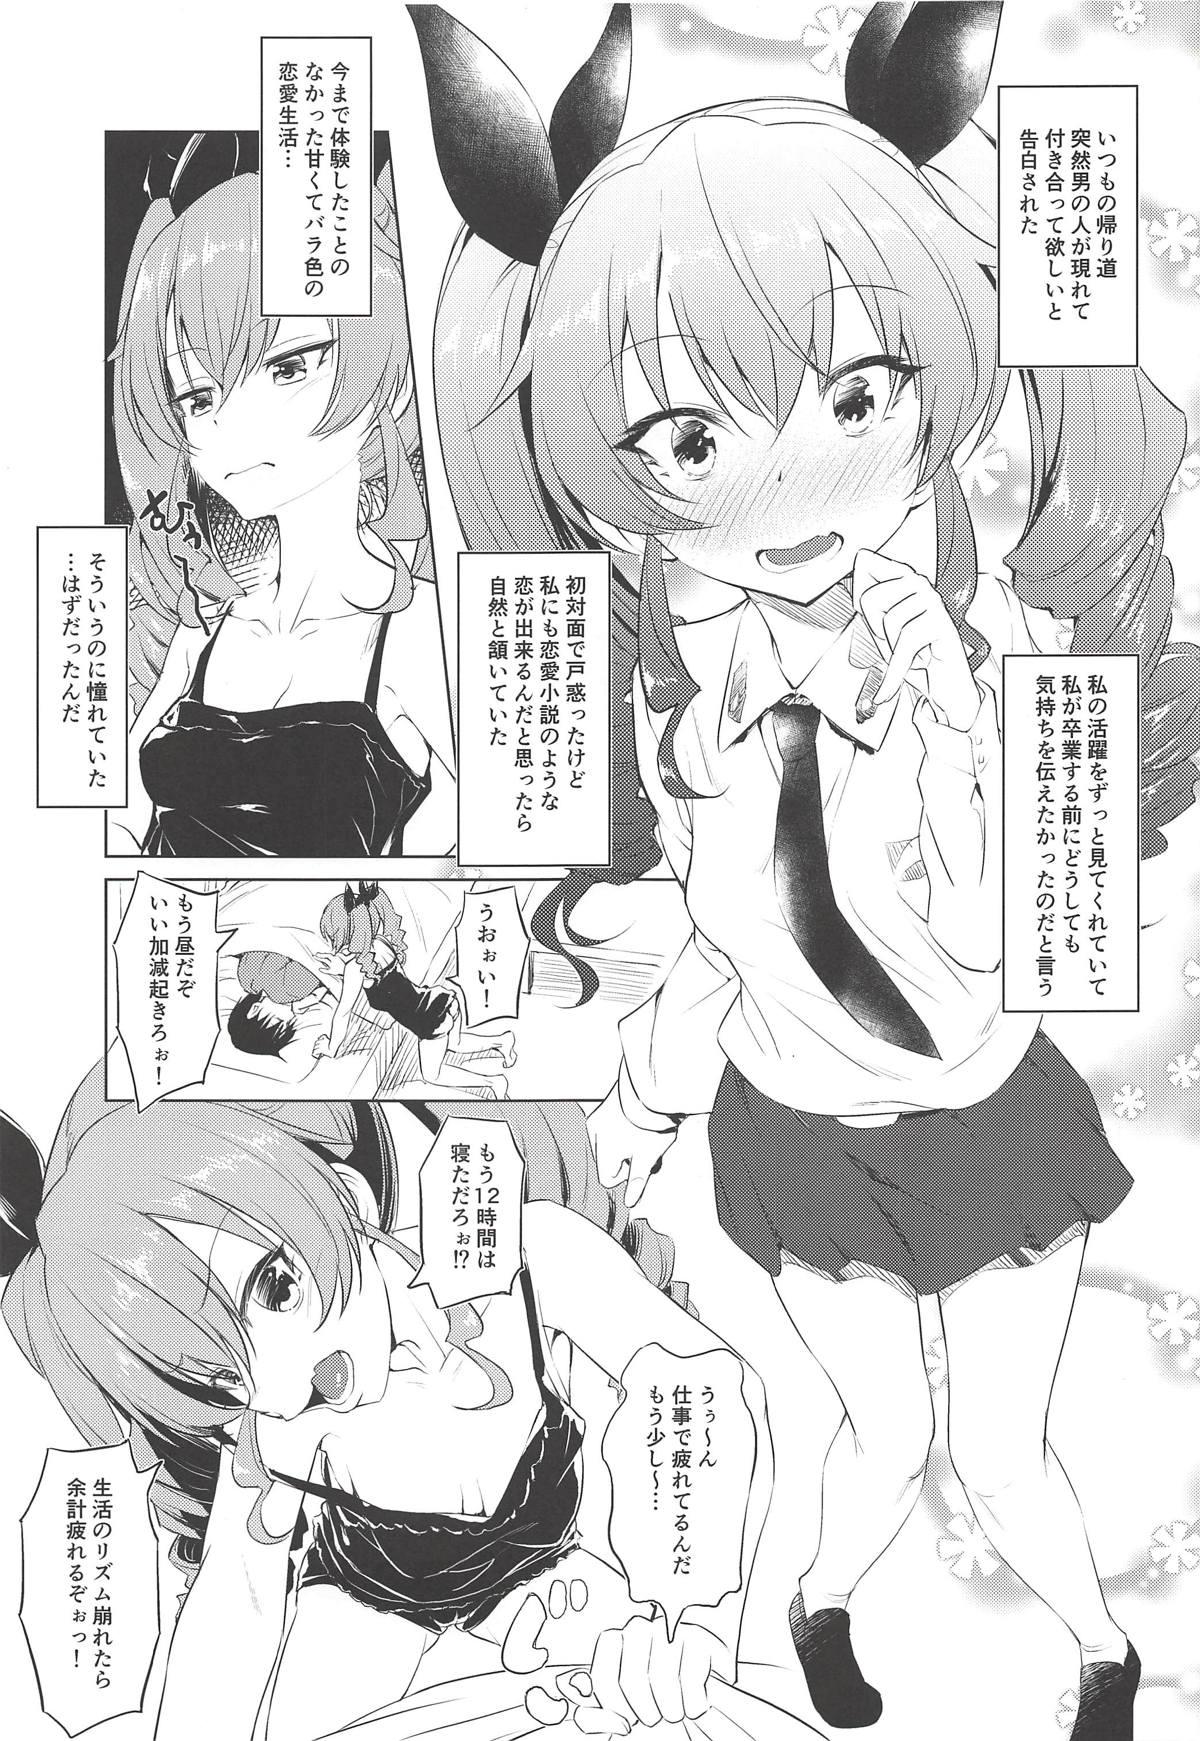 Point Of View Icha Chovy - Girls und panzer People Having Sex - Page 2